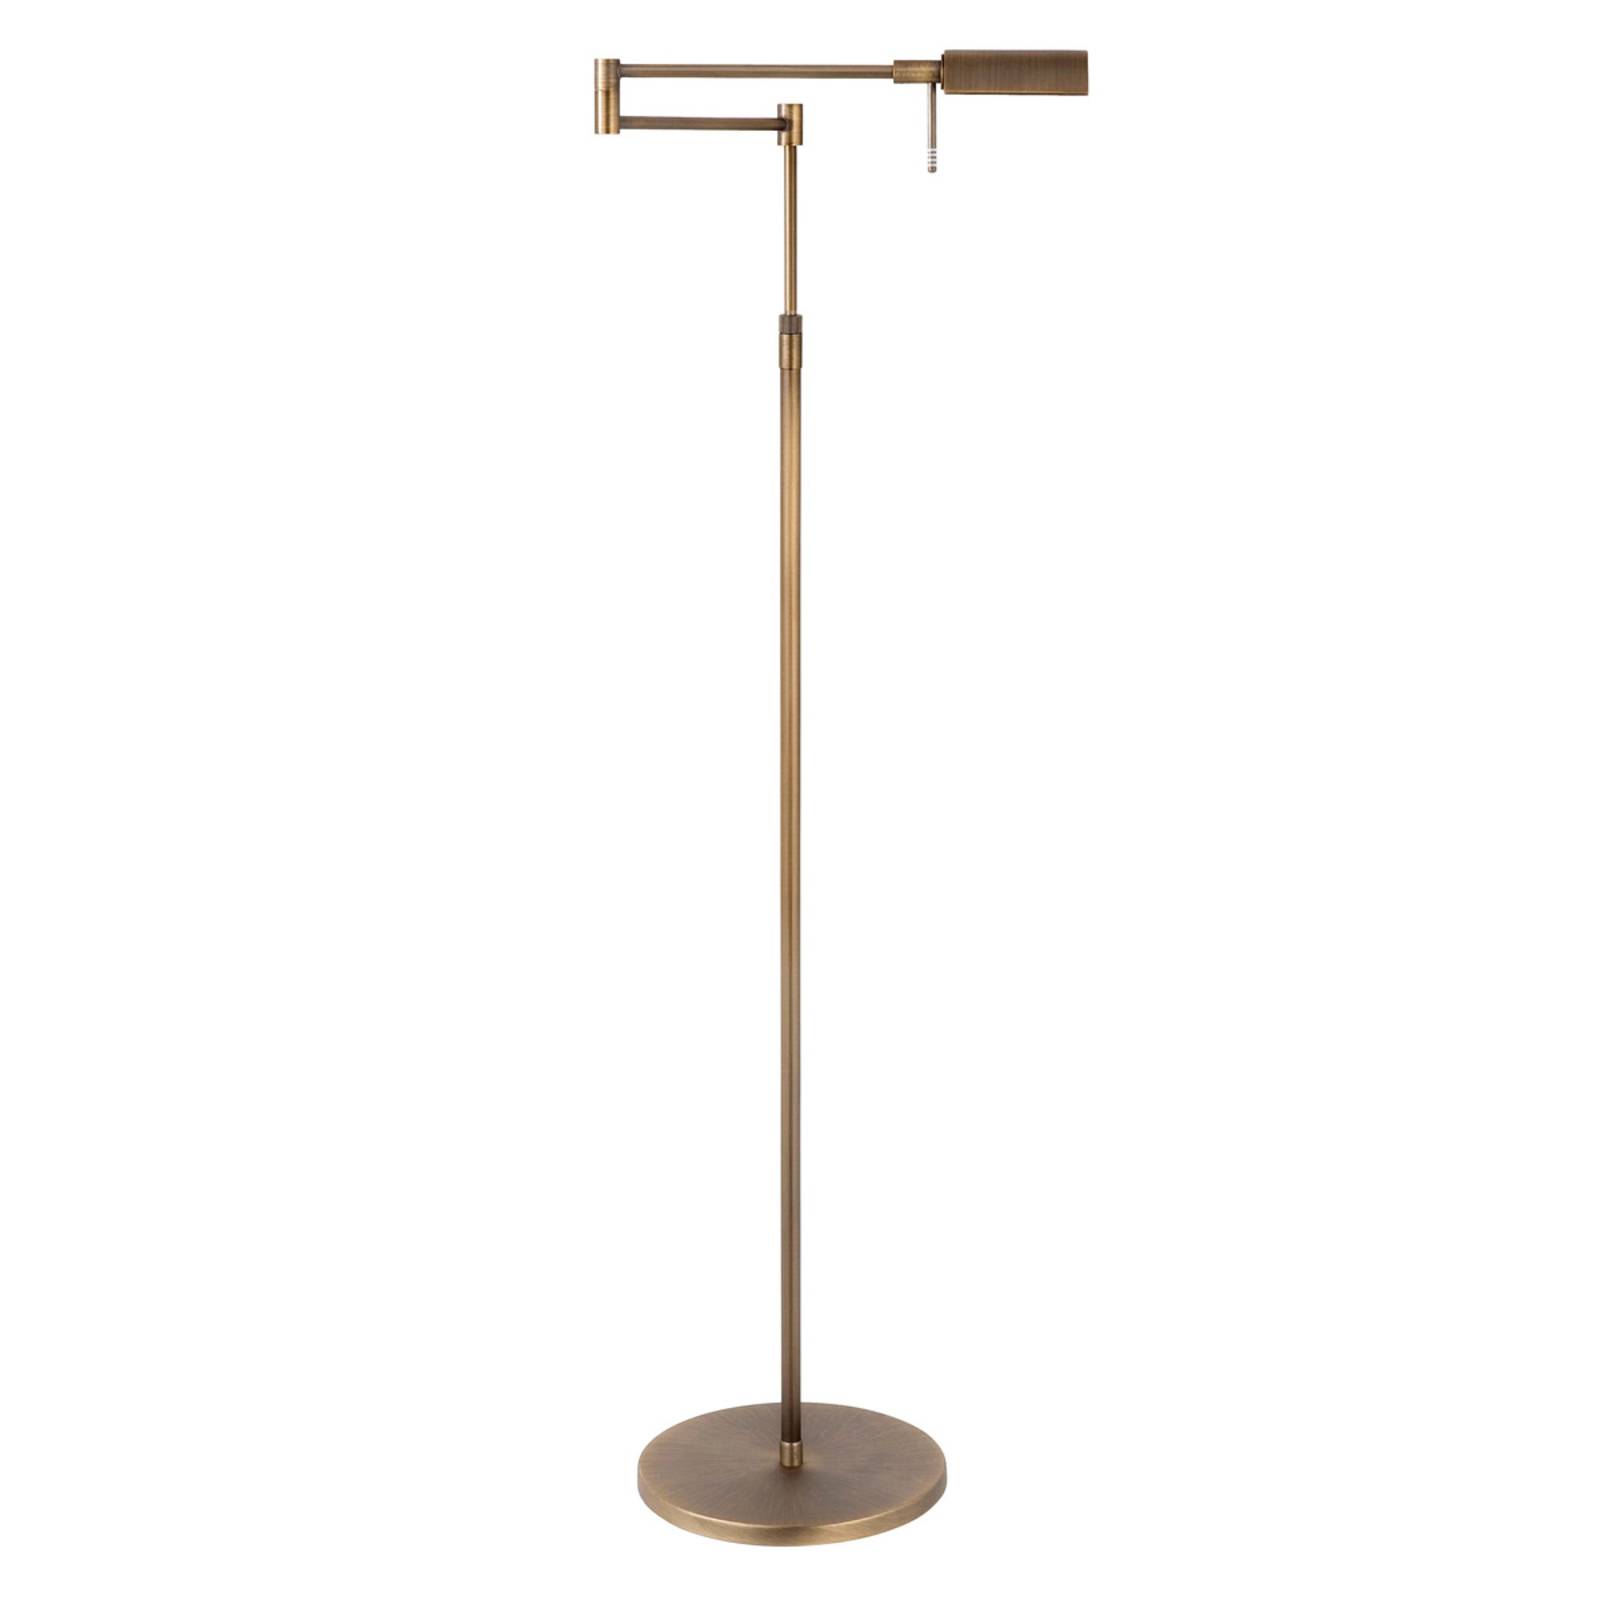 New Bari LED floor lamp with a classic design